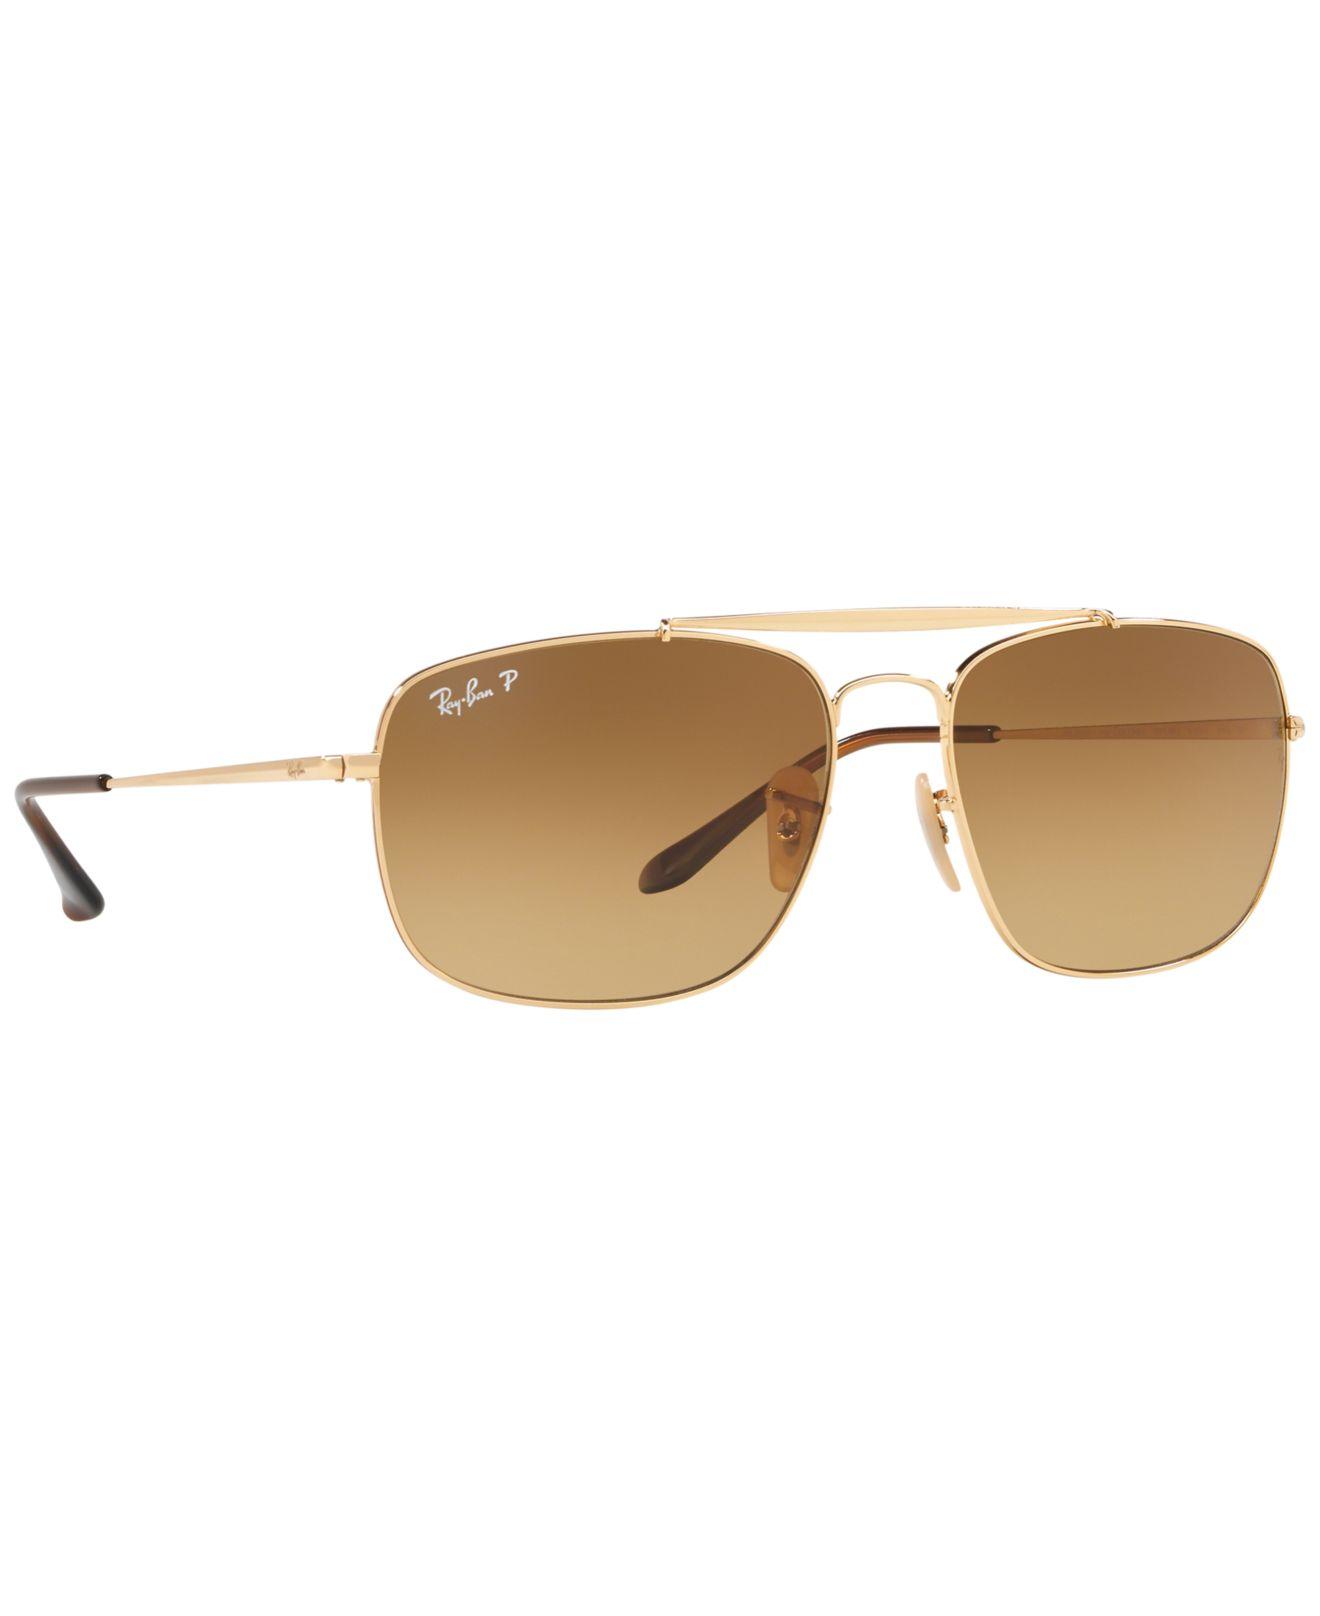 Ray Ban Polarized Sunglasses Rb3560 The Colonel In Brown For Men Lyst